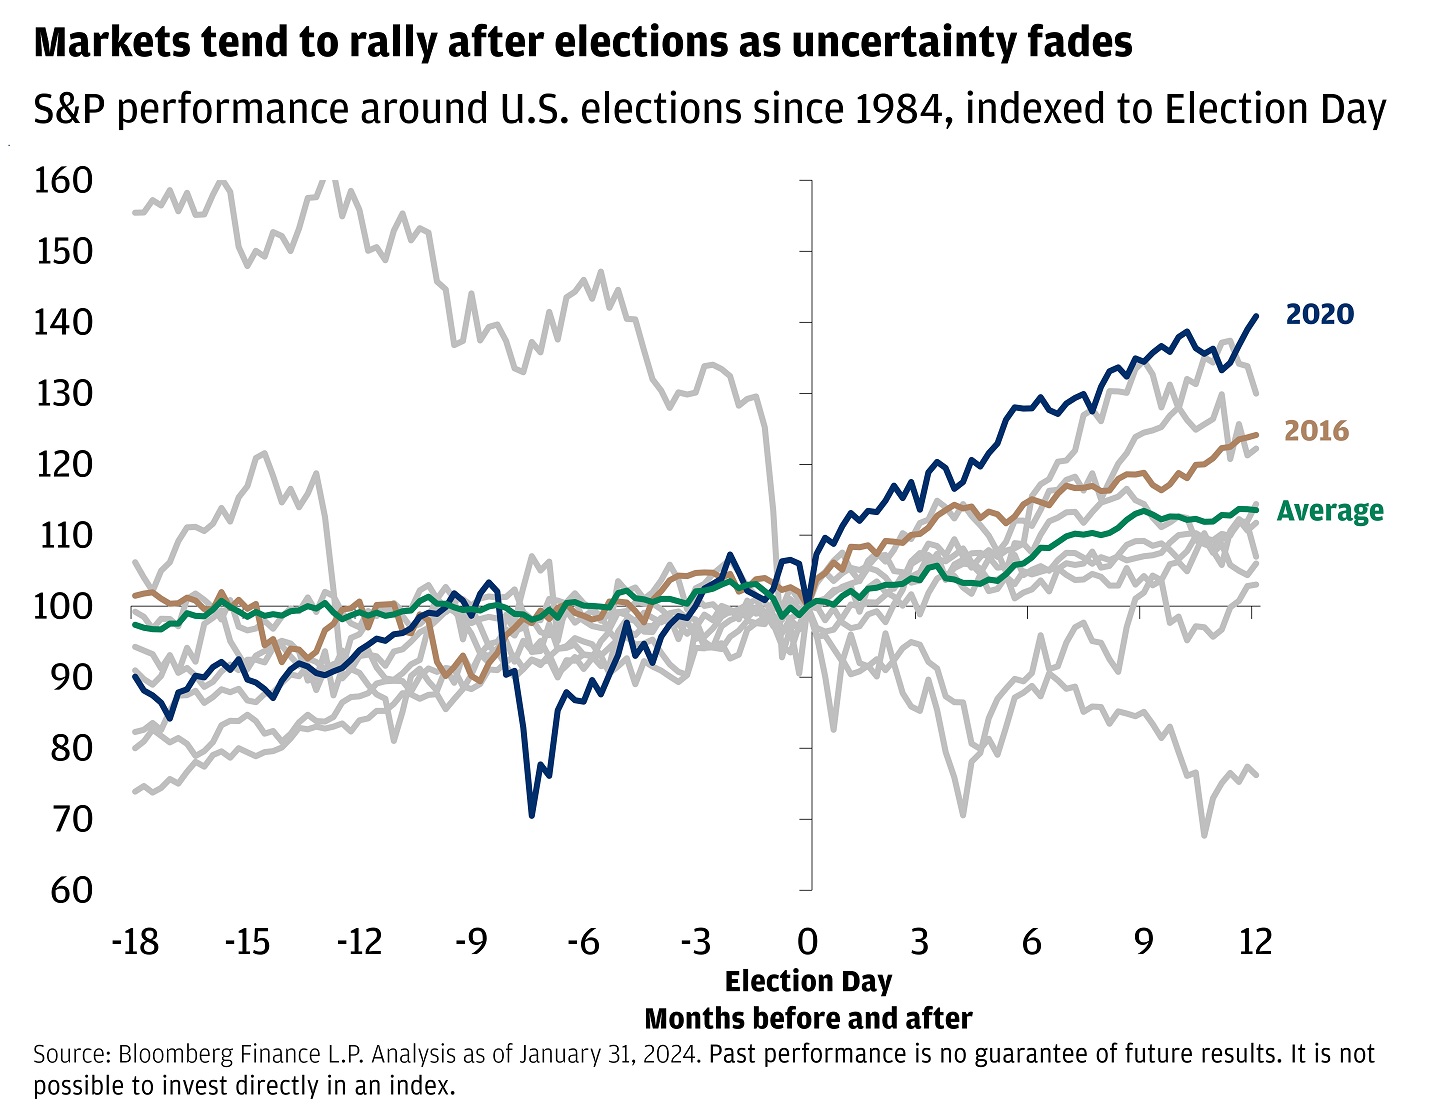 This line graph shows the S&P 500 performance around U.S. elections since 1980, Indexed to Election Day.